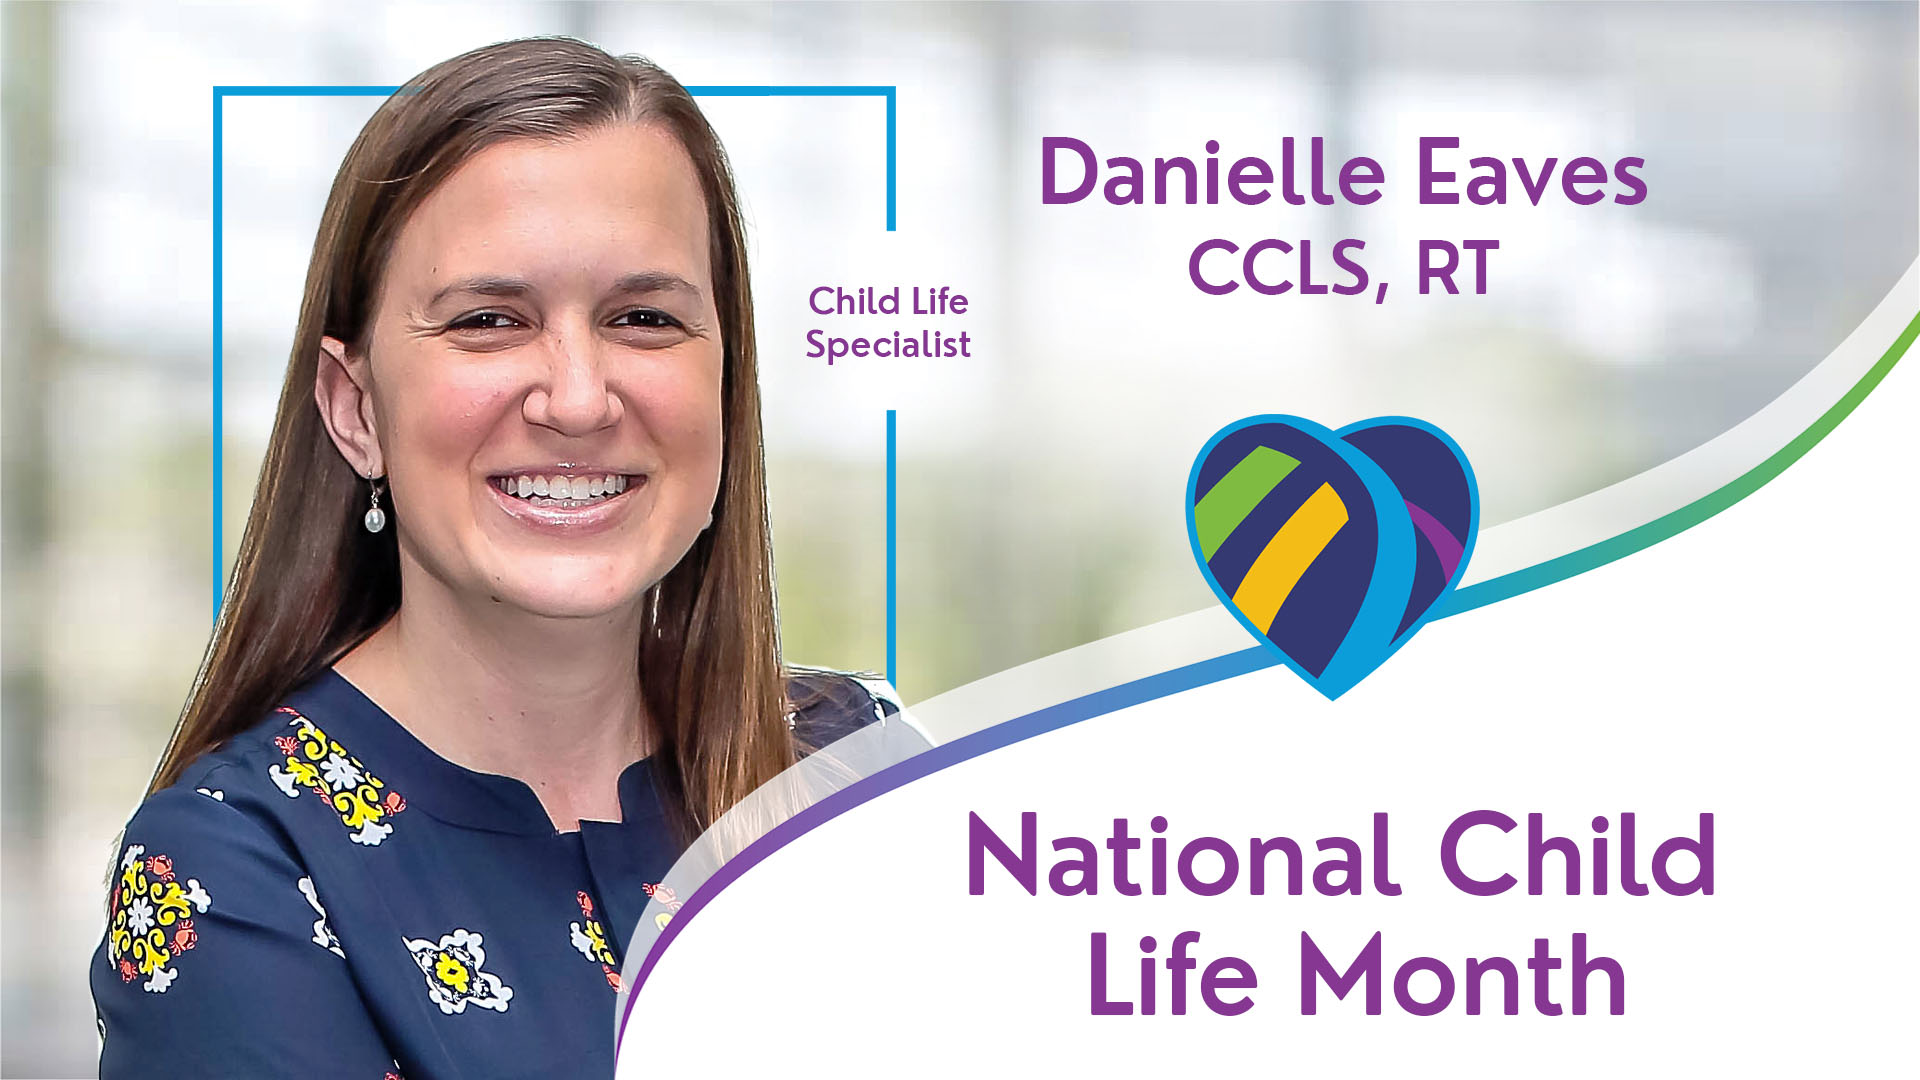 Danielle Eaves Child Life Specialist